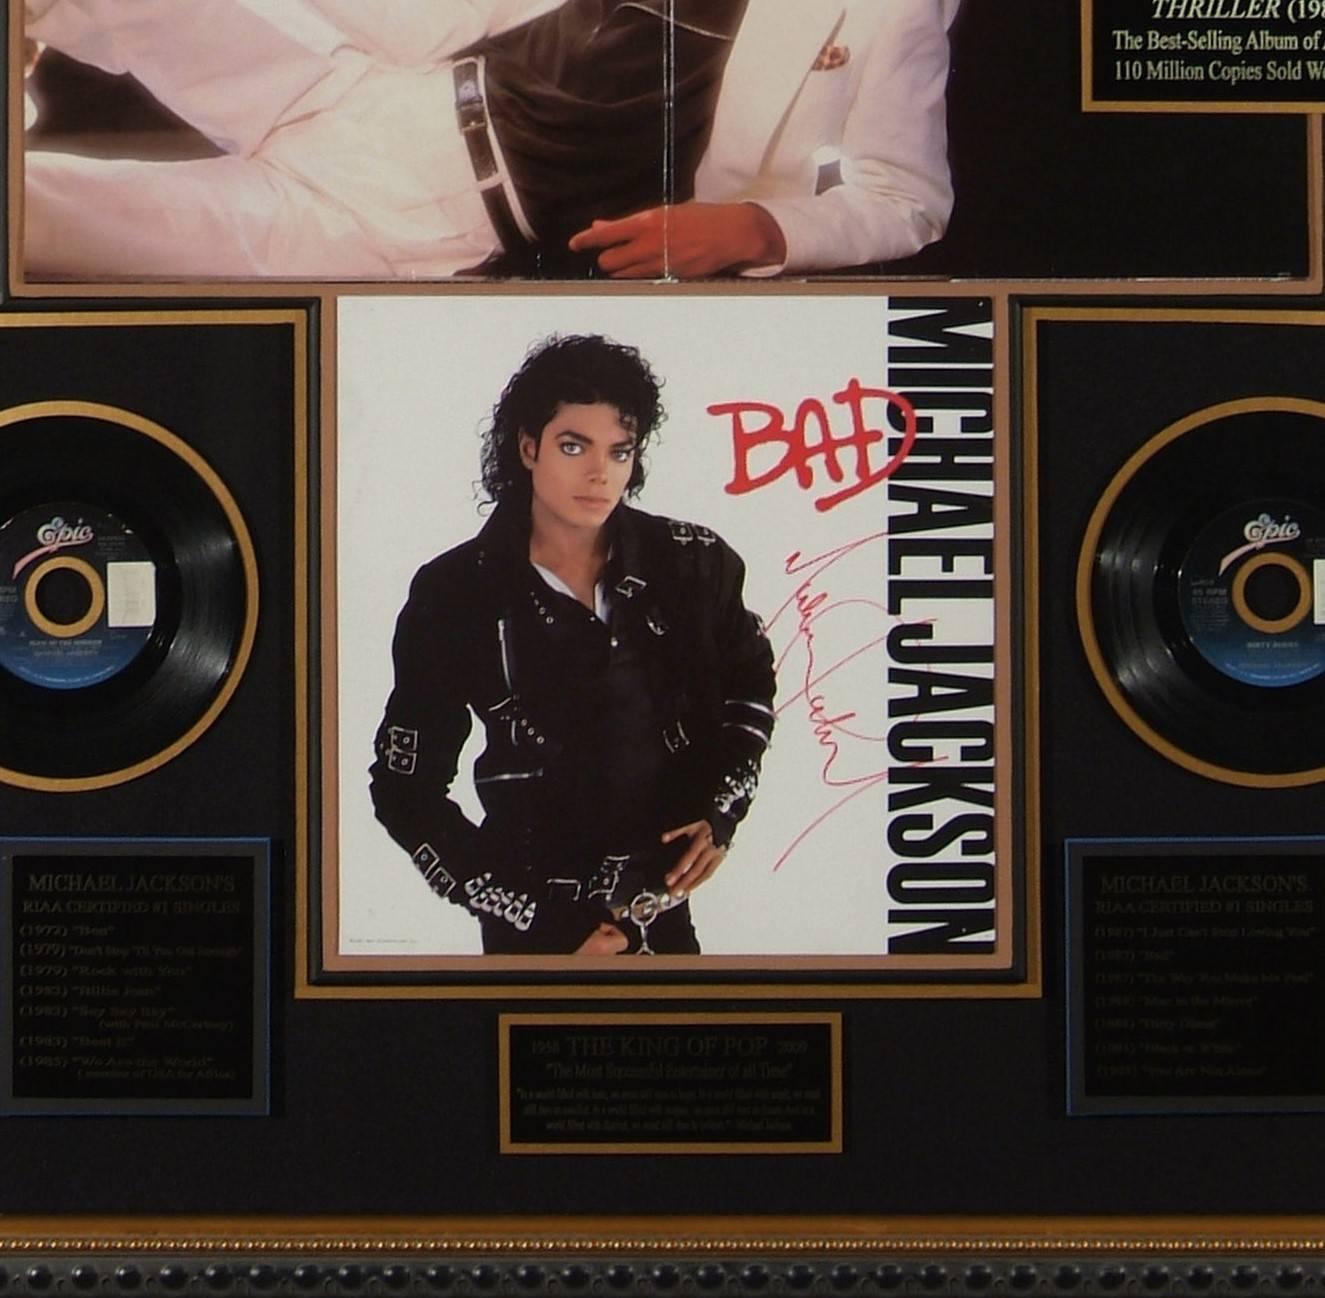 Sensational Michael Jackson autographed 'Bad' album framed memorabilia display 

• Featuring a rare bad album flat authentically hand signed in red by Michael Jackson.
• Framed with all 14 of Jackson’s record breaking #1 singles, as well as the